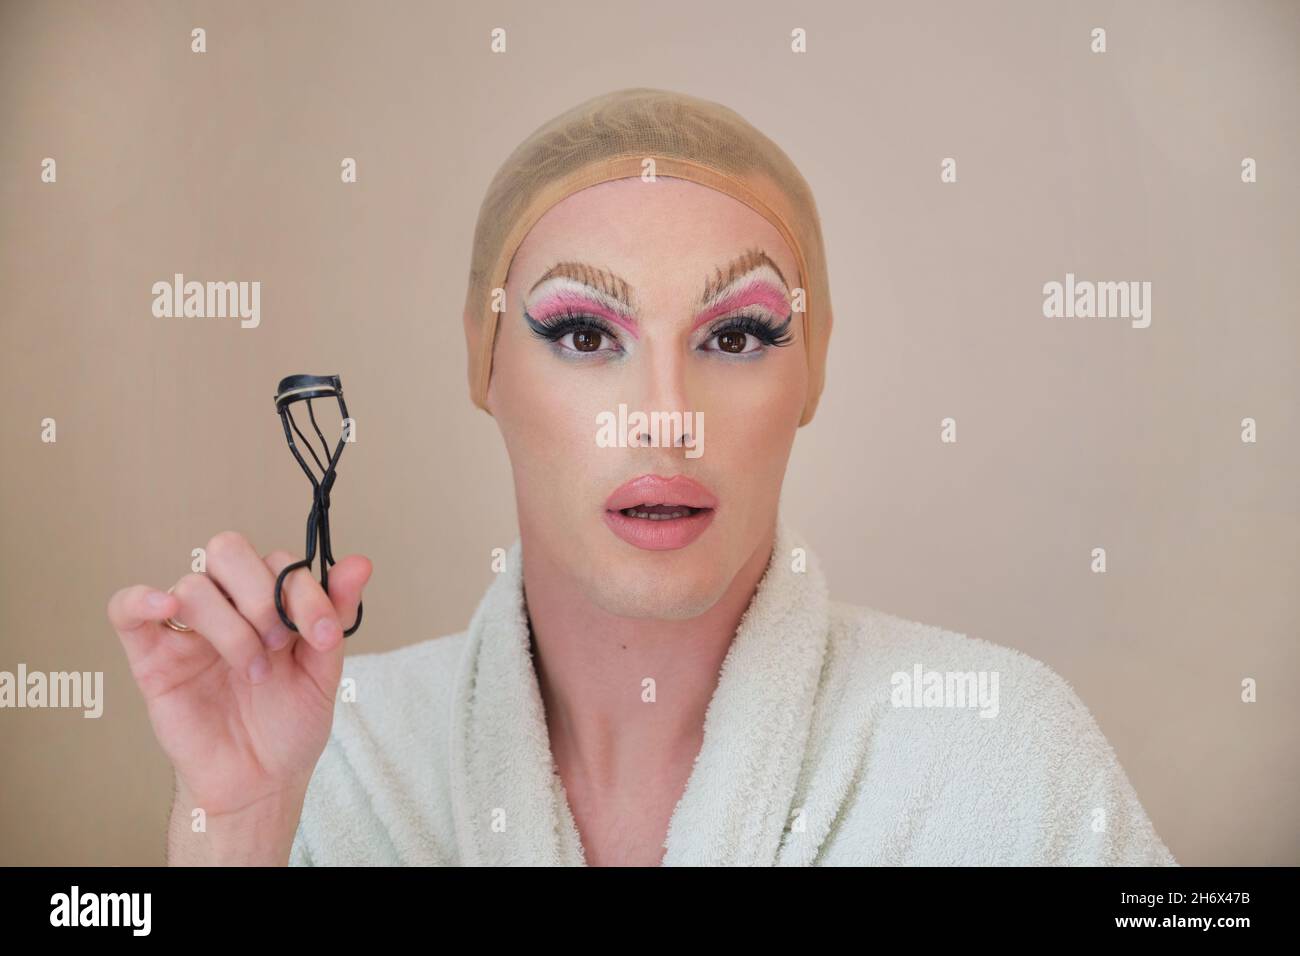 Drag queen person with a eyelash curler and wearing bathrobe looking at camera. Stock Photo